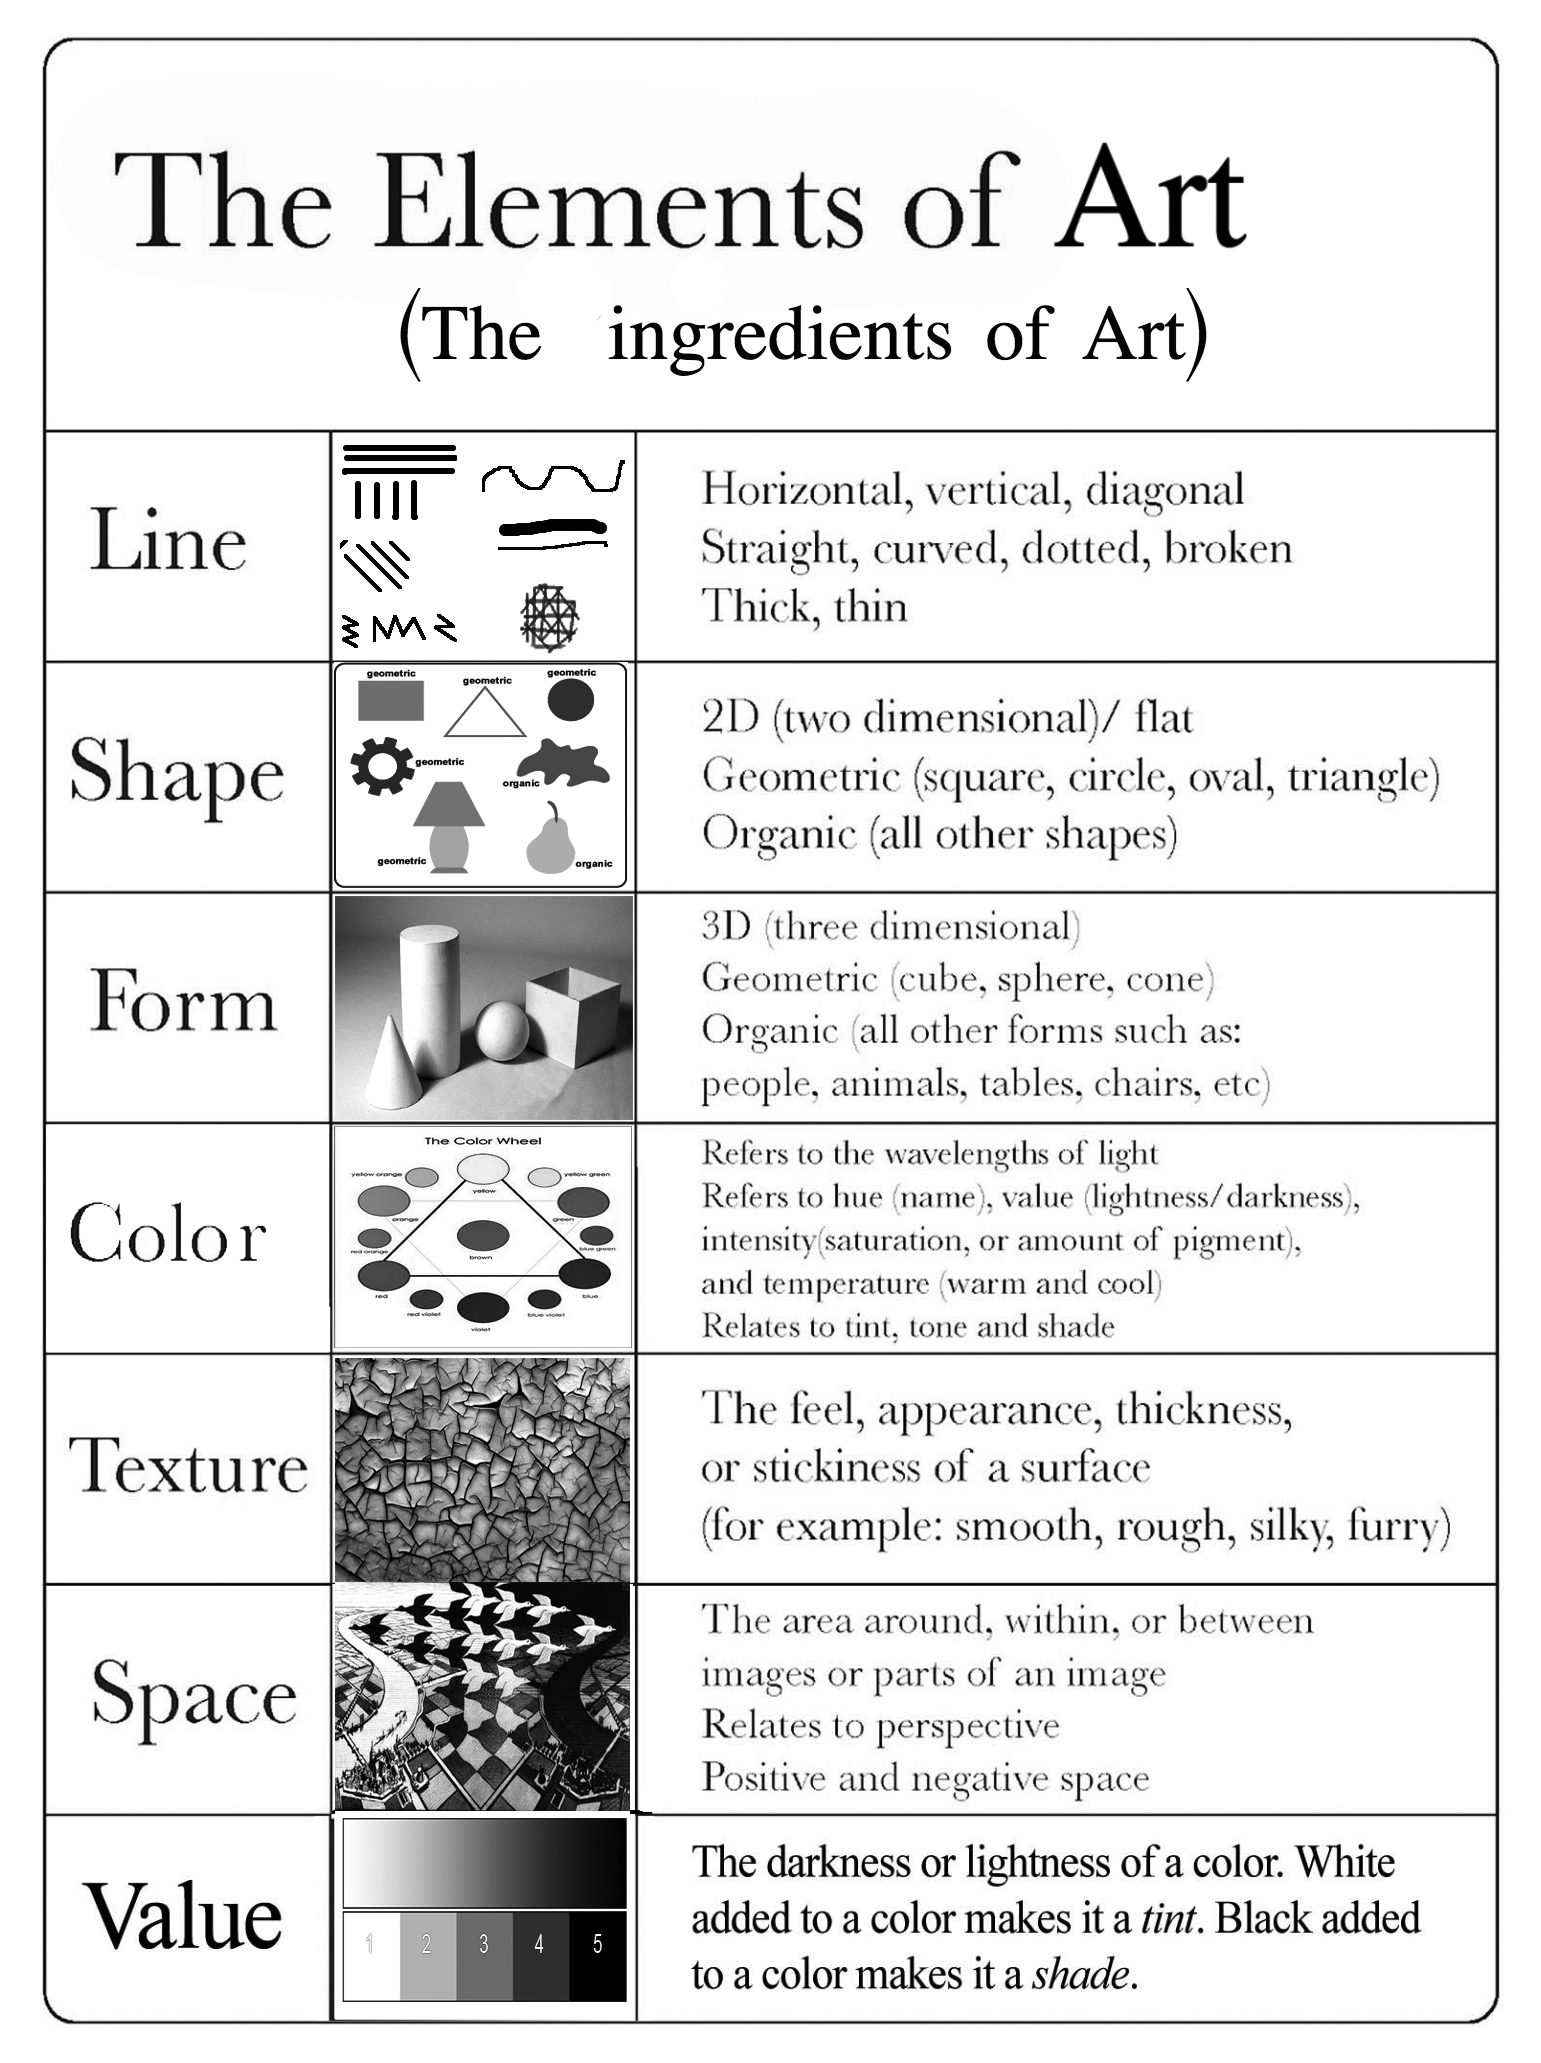 elements-of-art-and-principles-of-design-worksheet-nidecmege-my-xxx